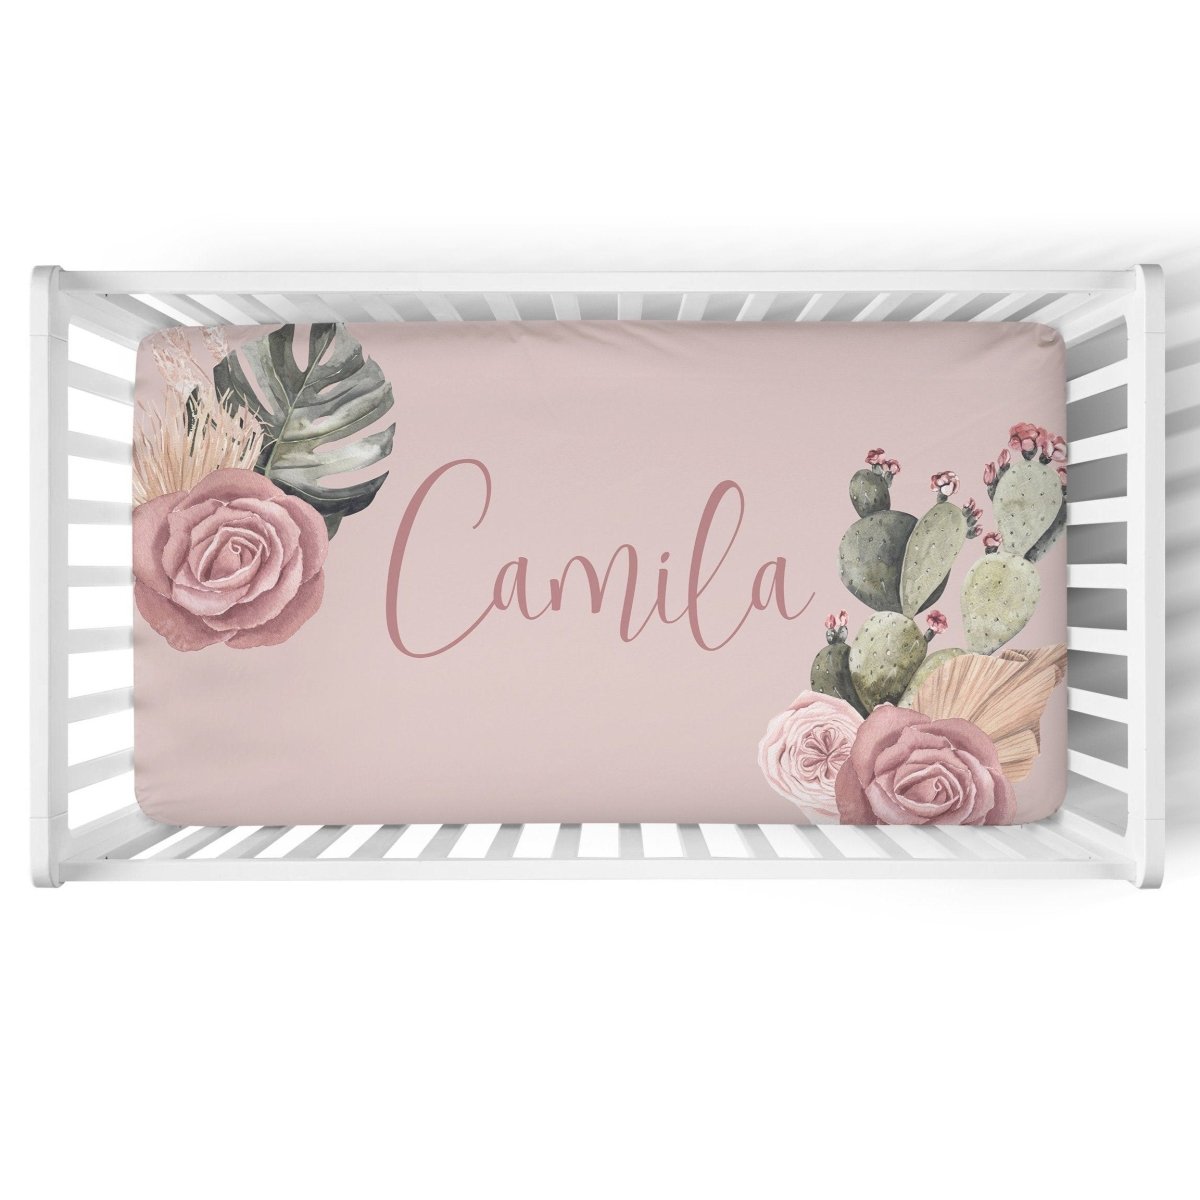 Desert Rose Personalized Crib Sheet - gender_girl, Personalized_Yes, text